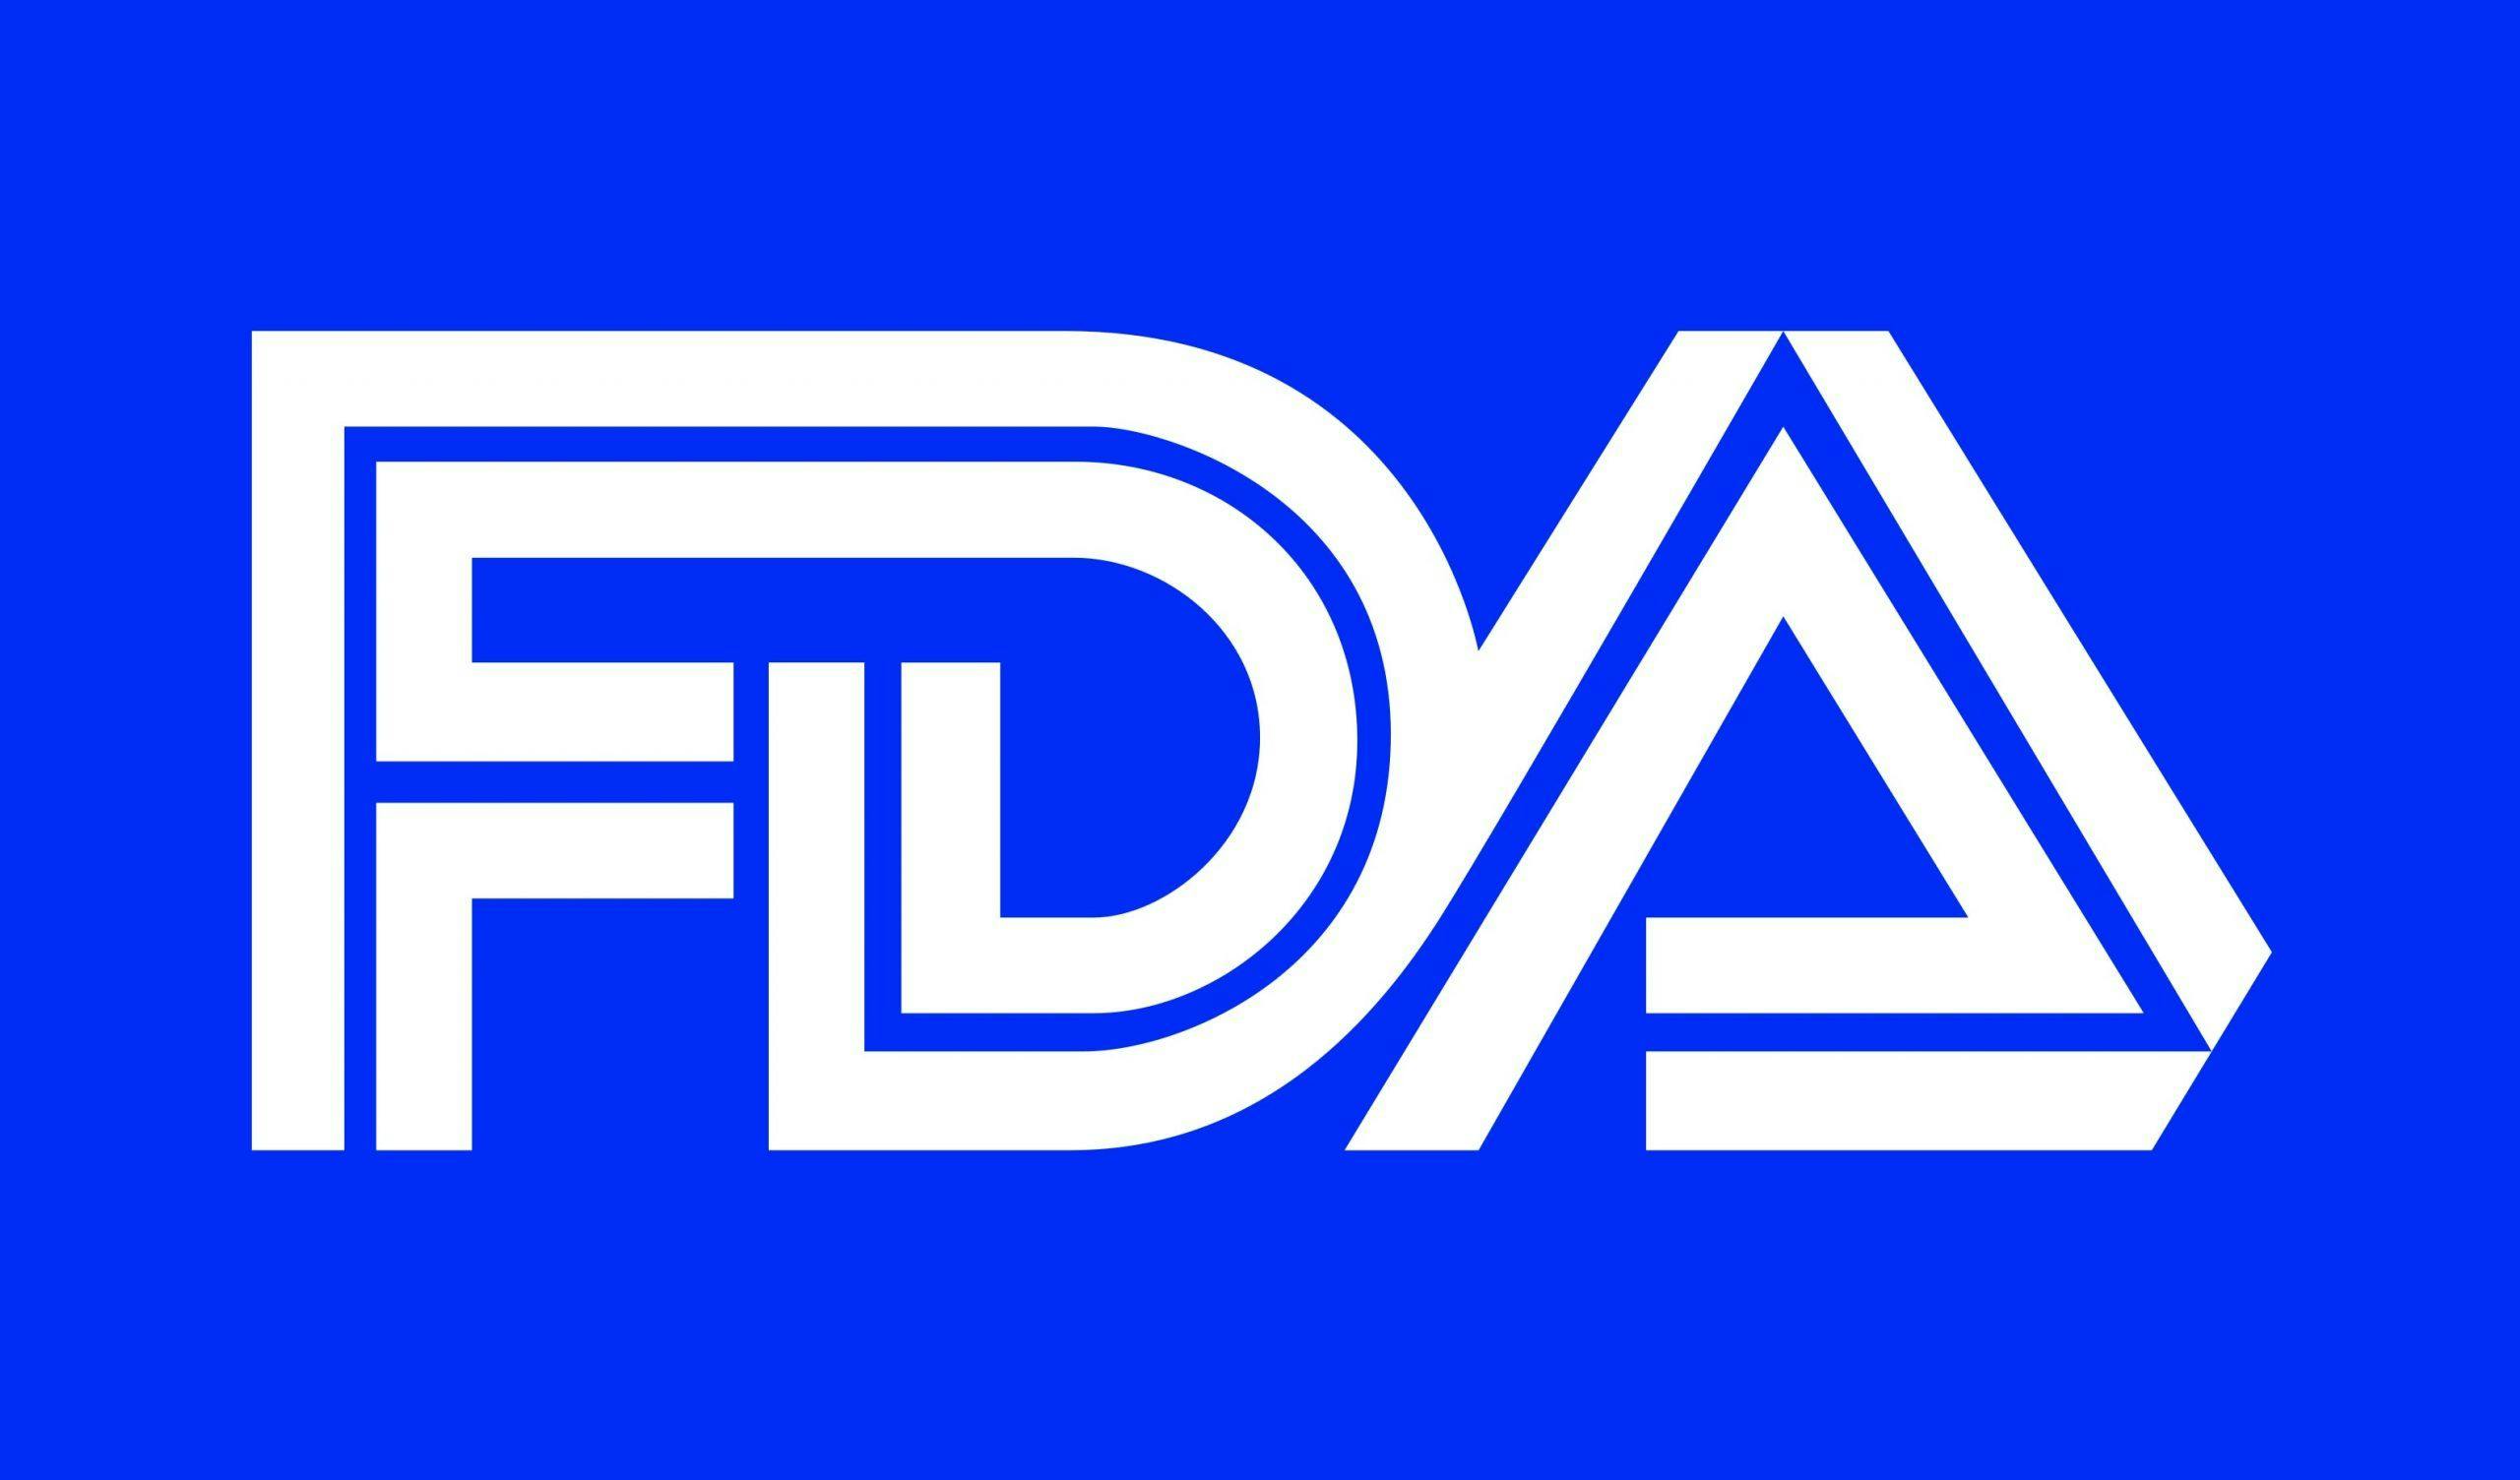 The FDA Accepts NDA for Novel Therapy for CKD-Related Anemia